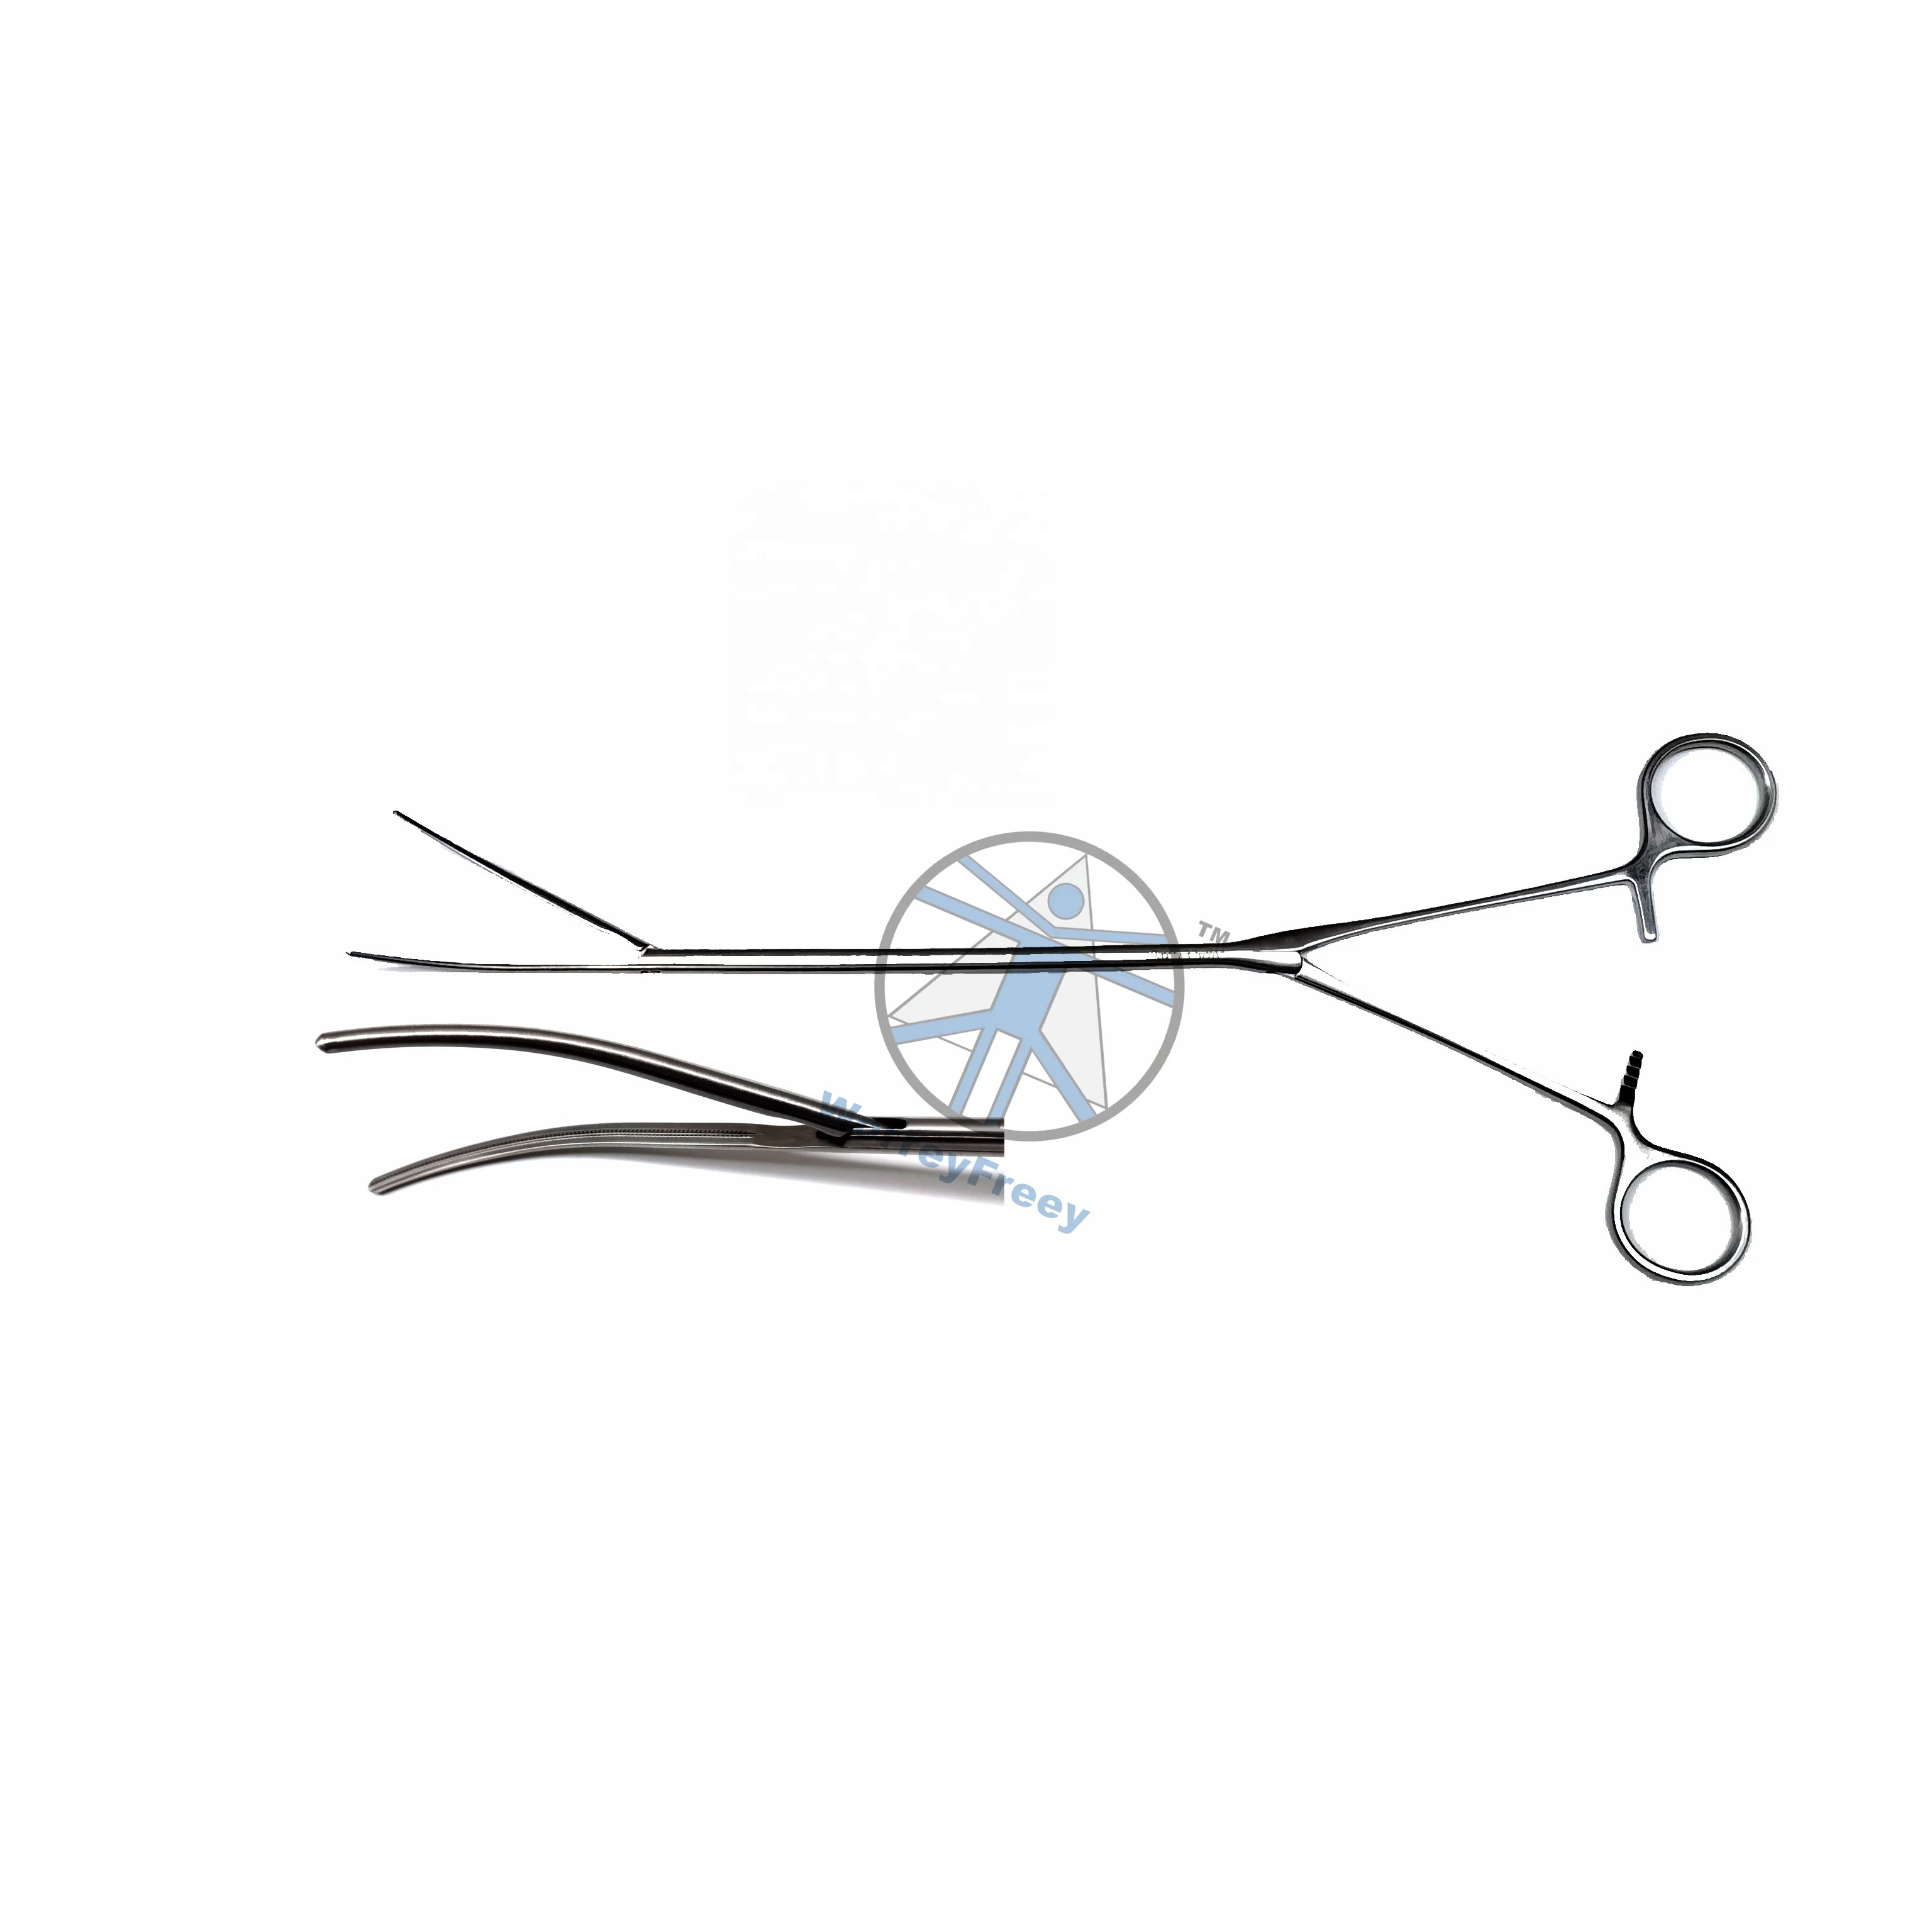 

Thoracic Surgery Instruments, Thoracic operation equipment, Thoracoscopic Instruments 15/20/25mm hemostatic forceps